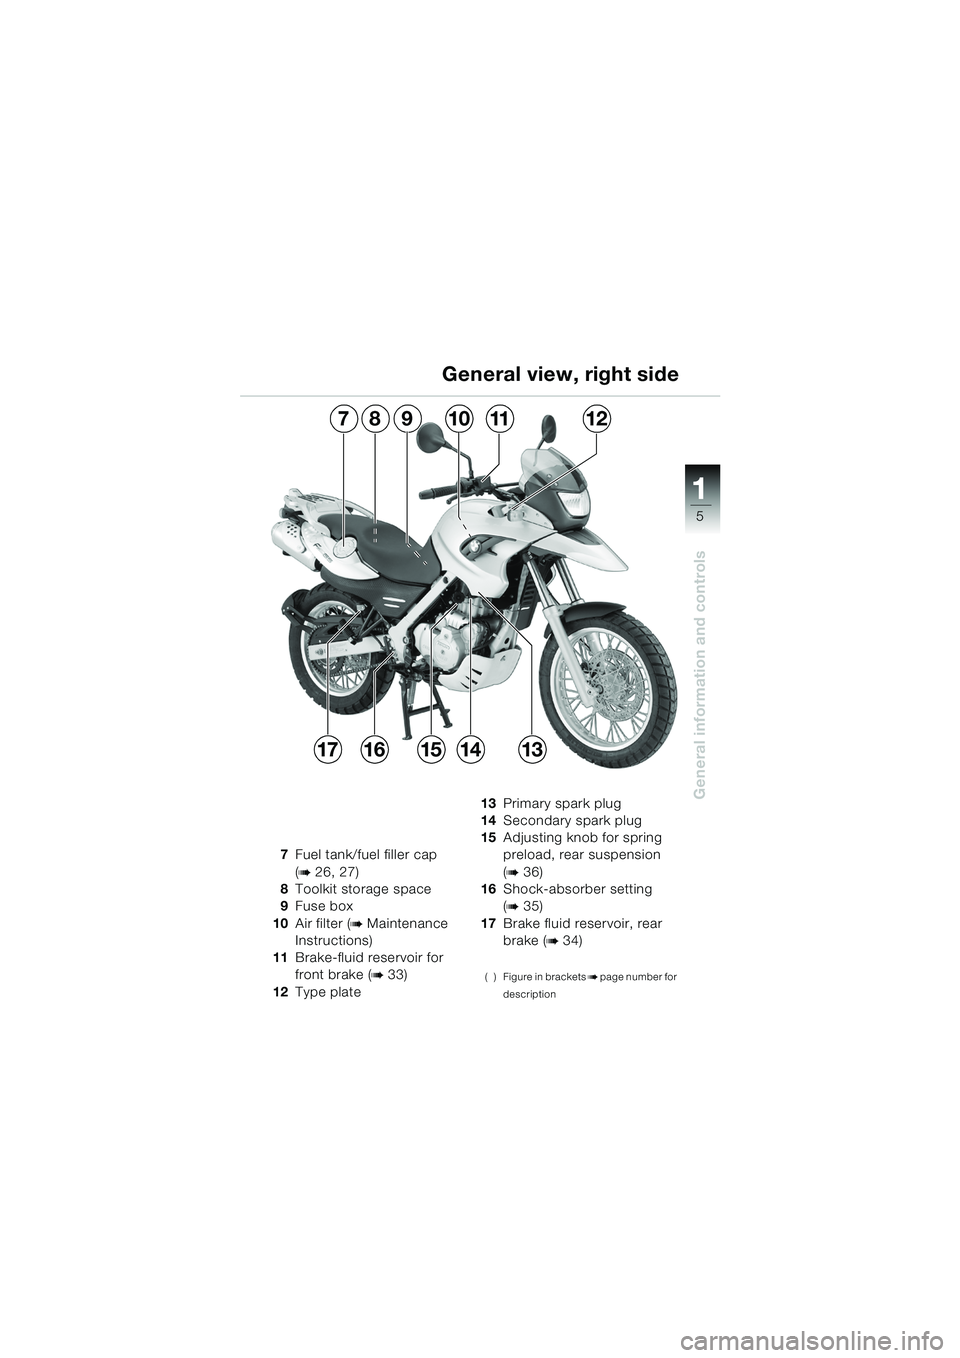 BMW MOTORRAD F 650 GS DAKAR 2003  Riders Manual (in English) 111
5
General information and controls
General view, right side
7Fuel tank/fuel filler cap
(
b 26, 27)
8 Toolkit storage space
9 Fuse box
10 Air filter (
b Maintenance 
Instructions)
11 Brake-fluid re